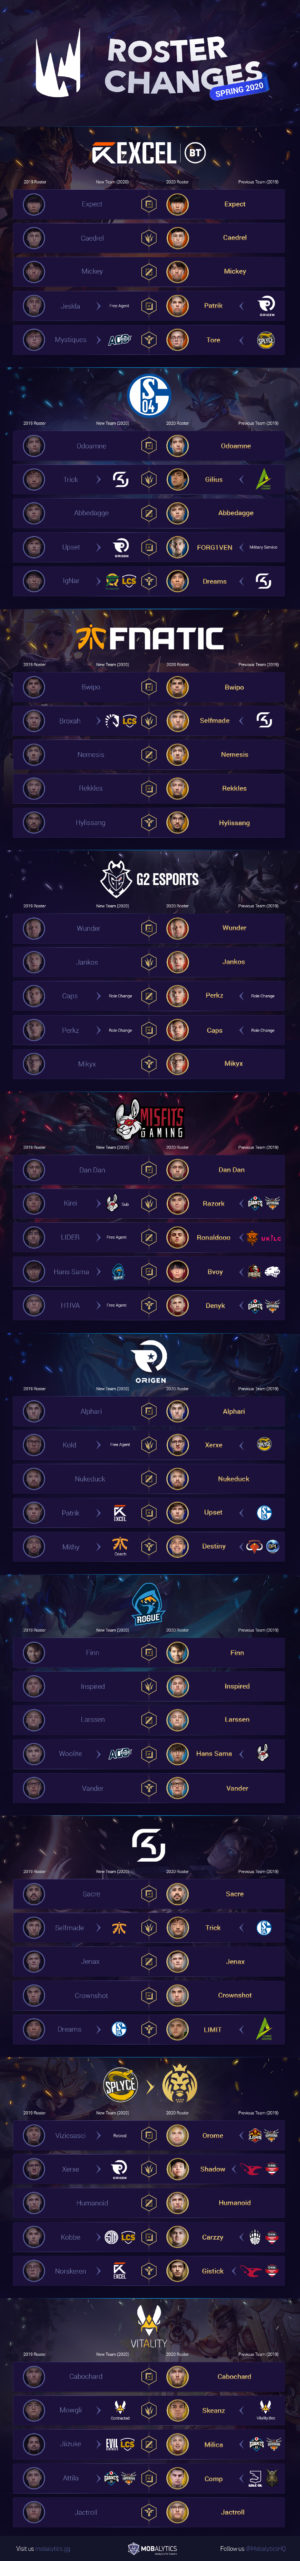 LEC Roster Changes Infographic (Spring 2020 Teams)